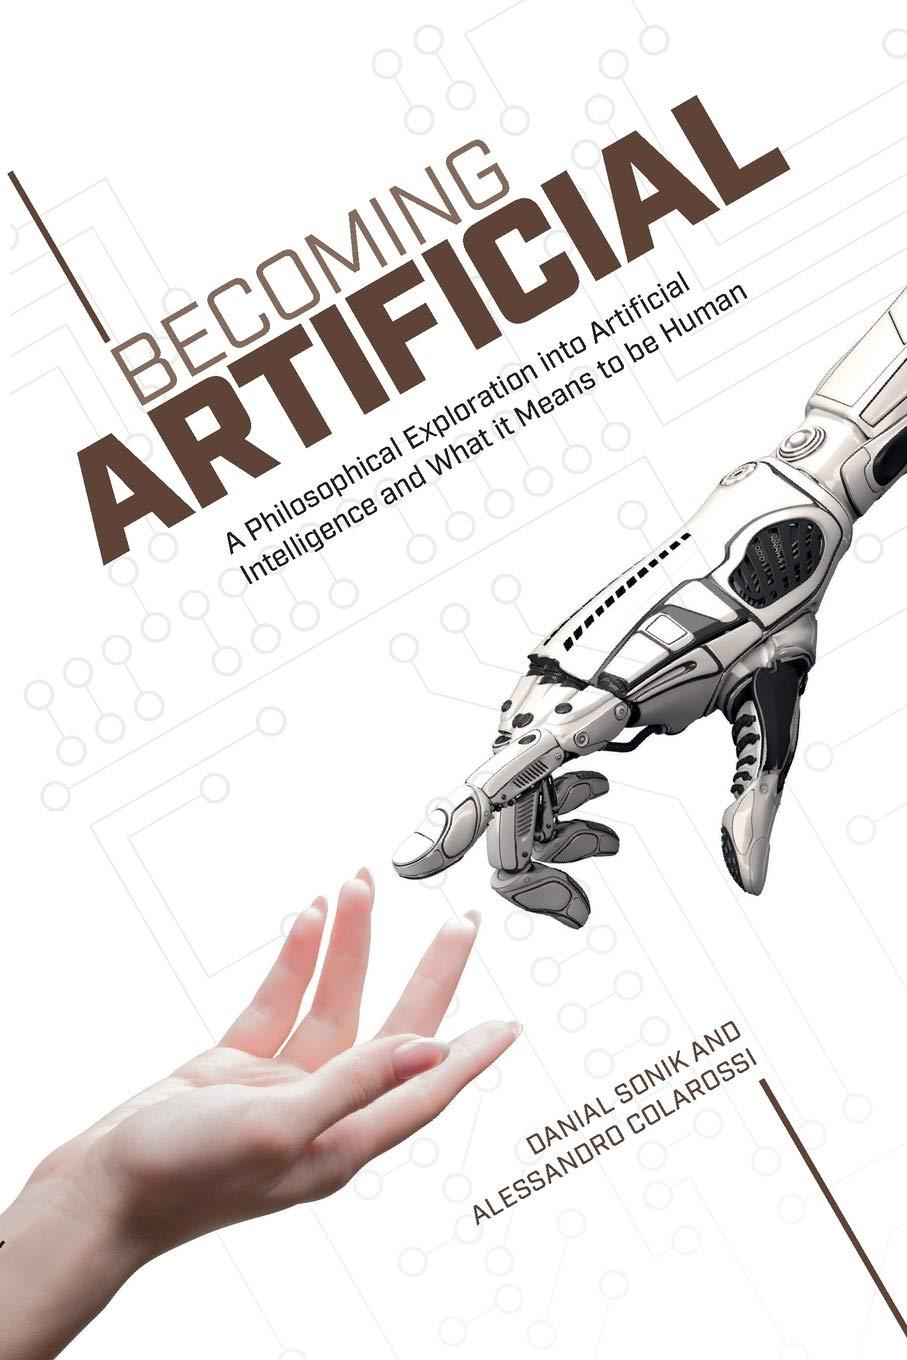 becoming artificial a philosophical exploration into artificial intelligence and what it means to be human